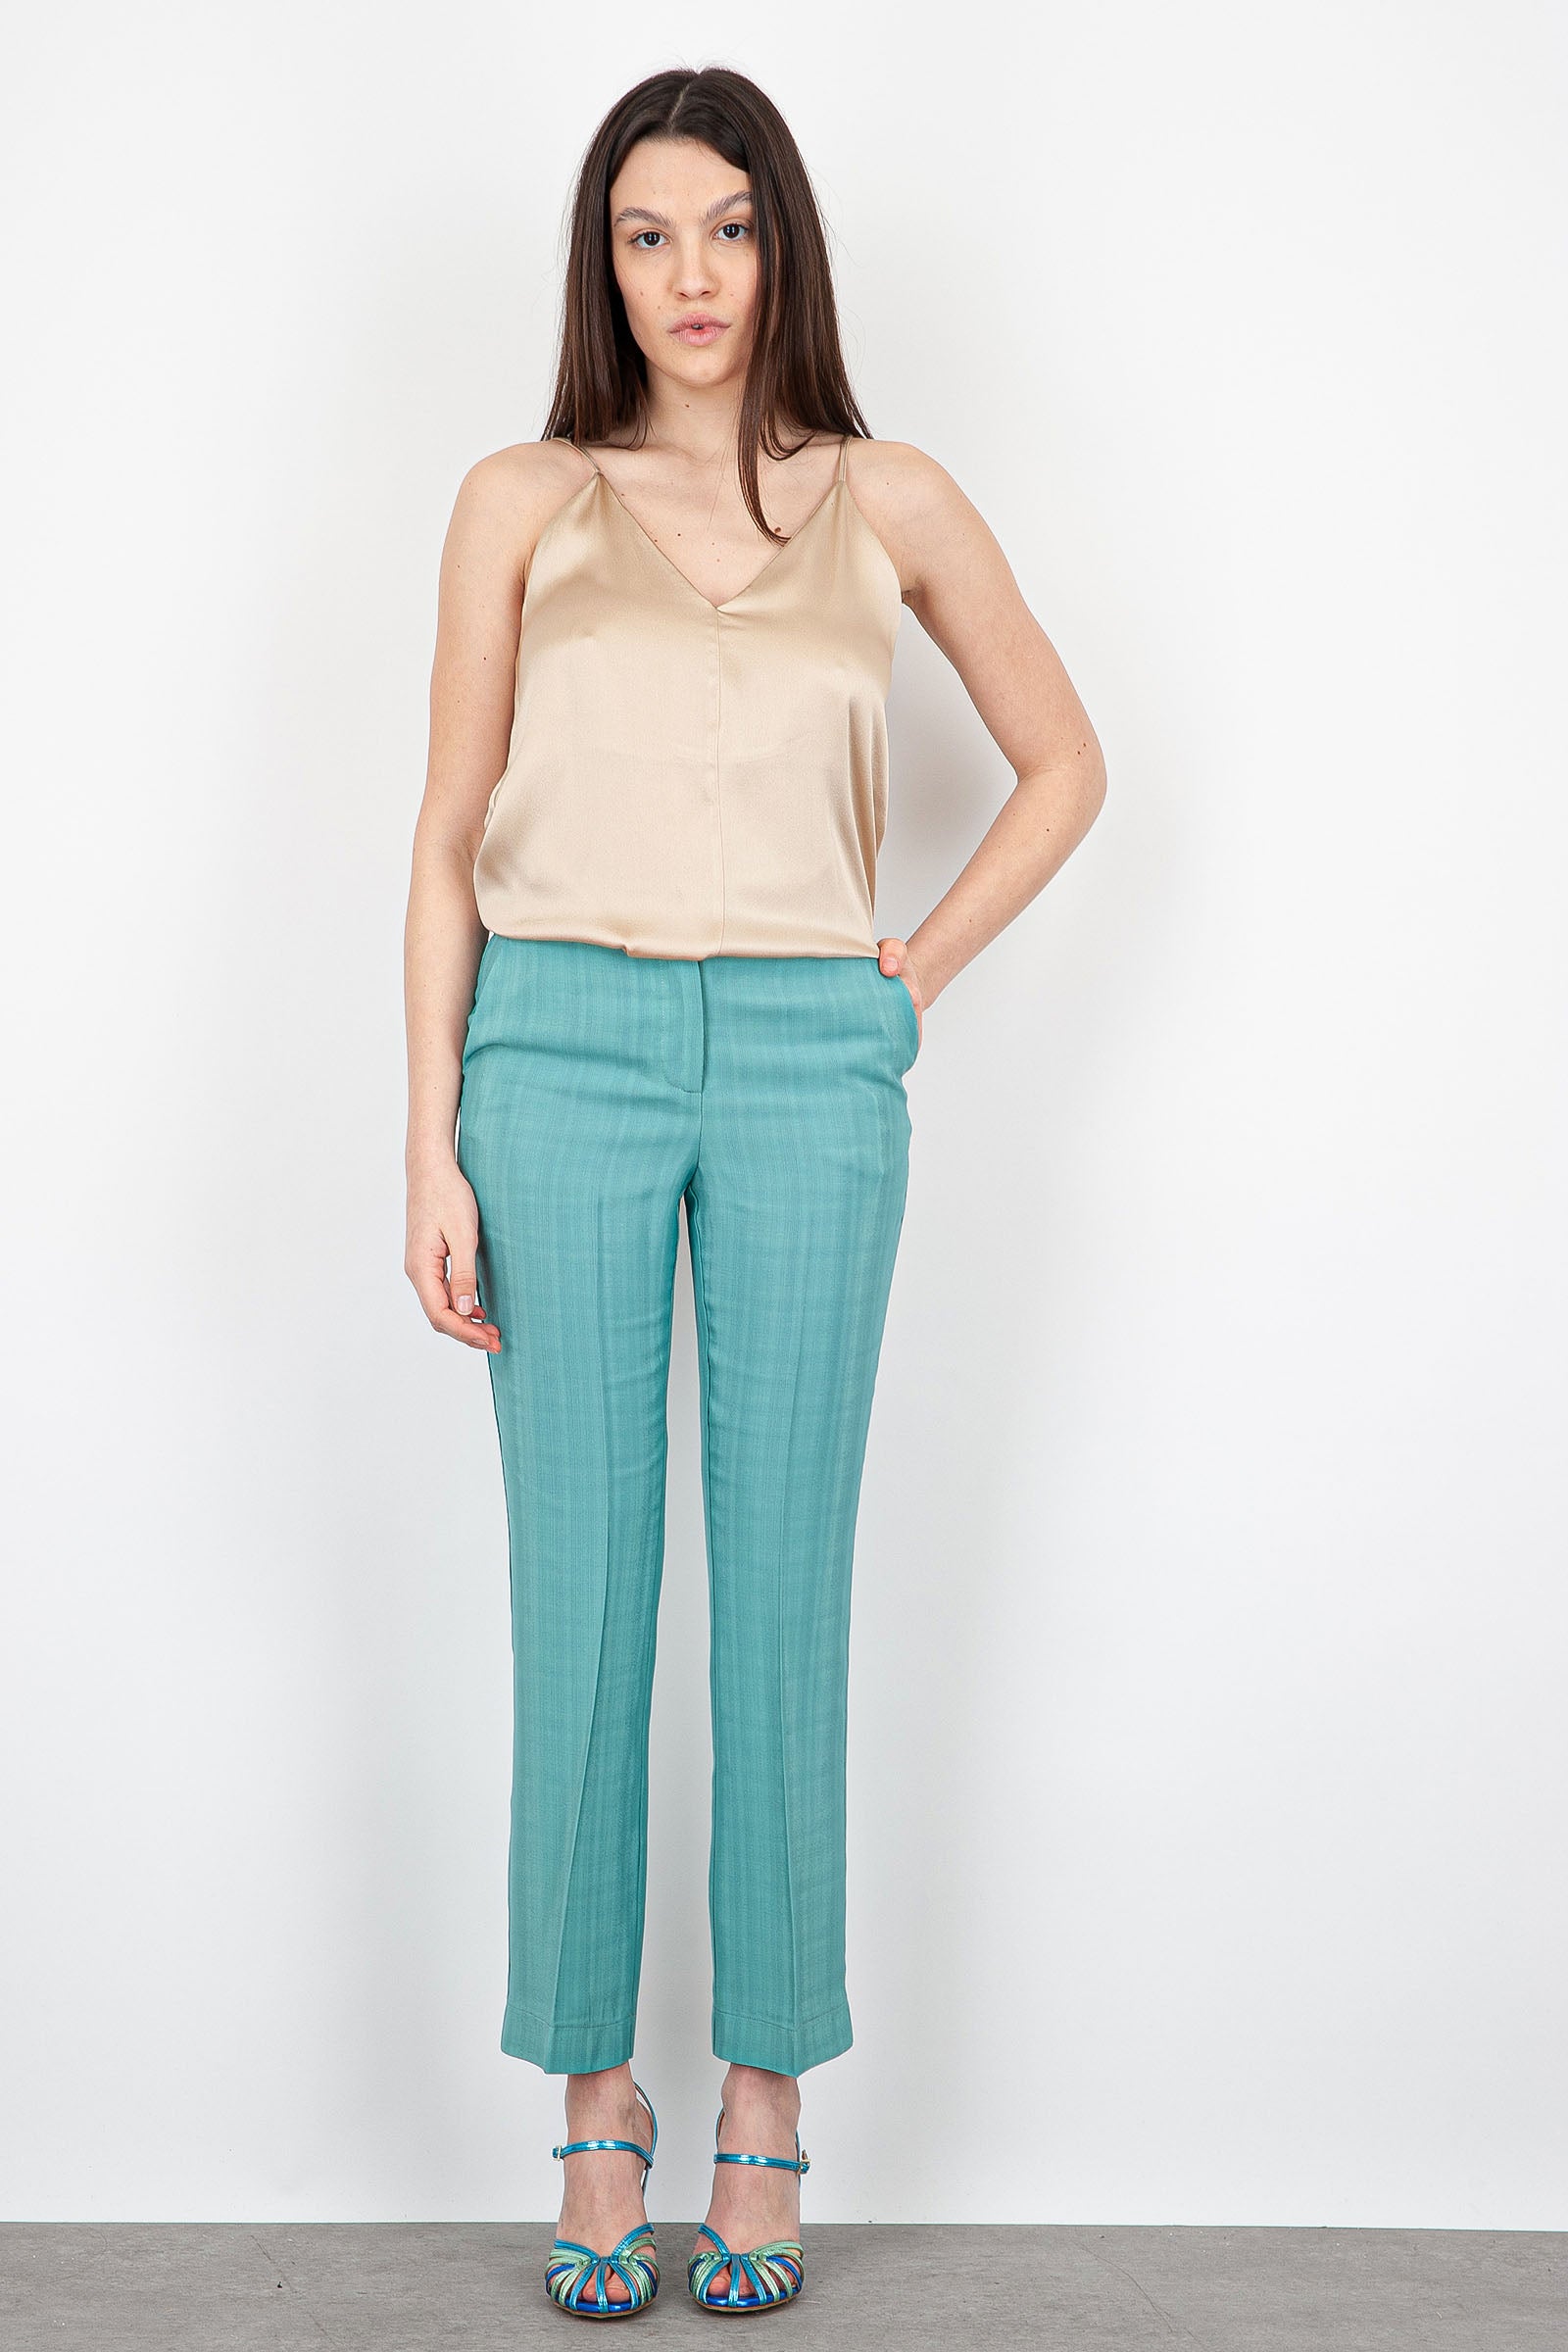 Semicouture Pamela Trousers Synthetic Teal Green - 6